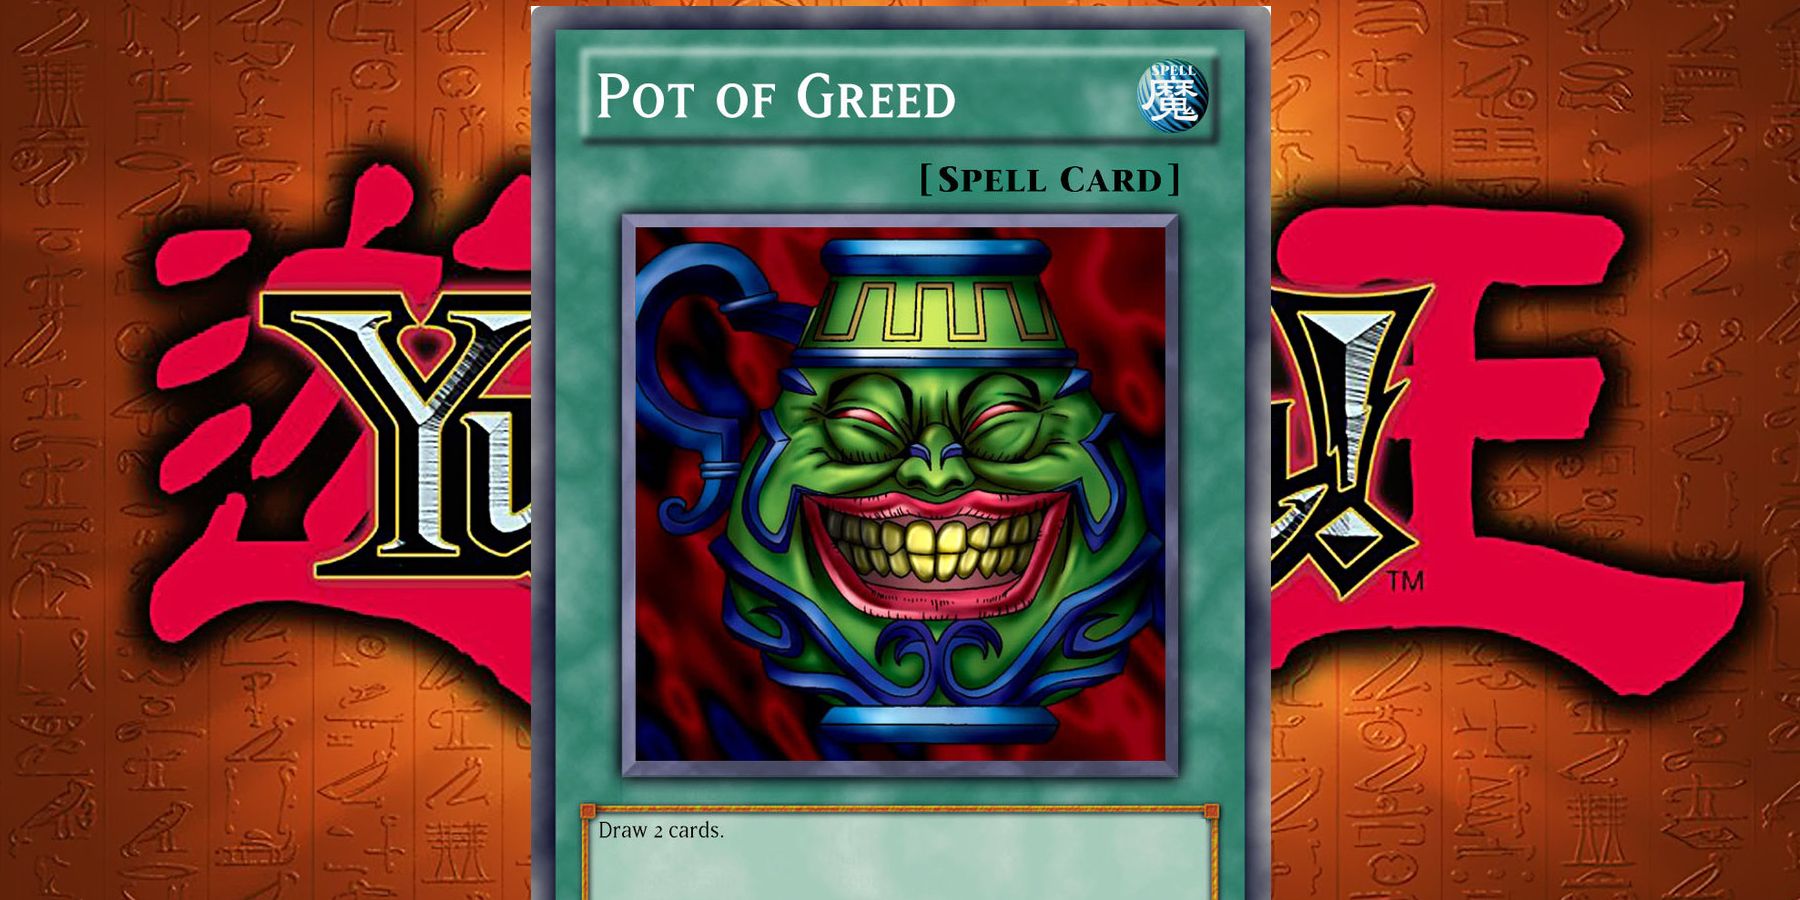 Pot of greed yugioh